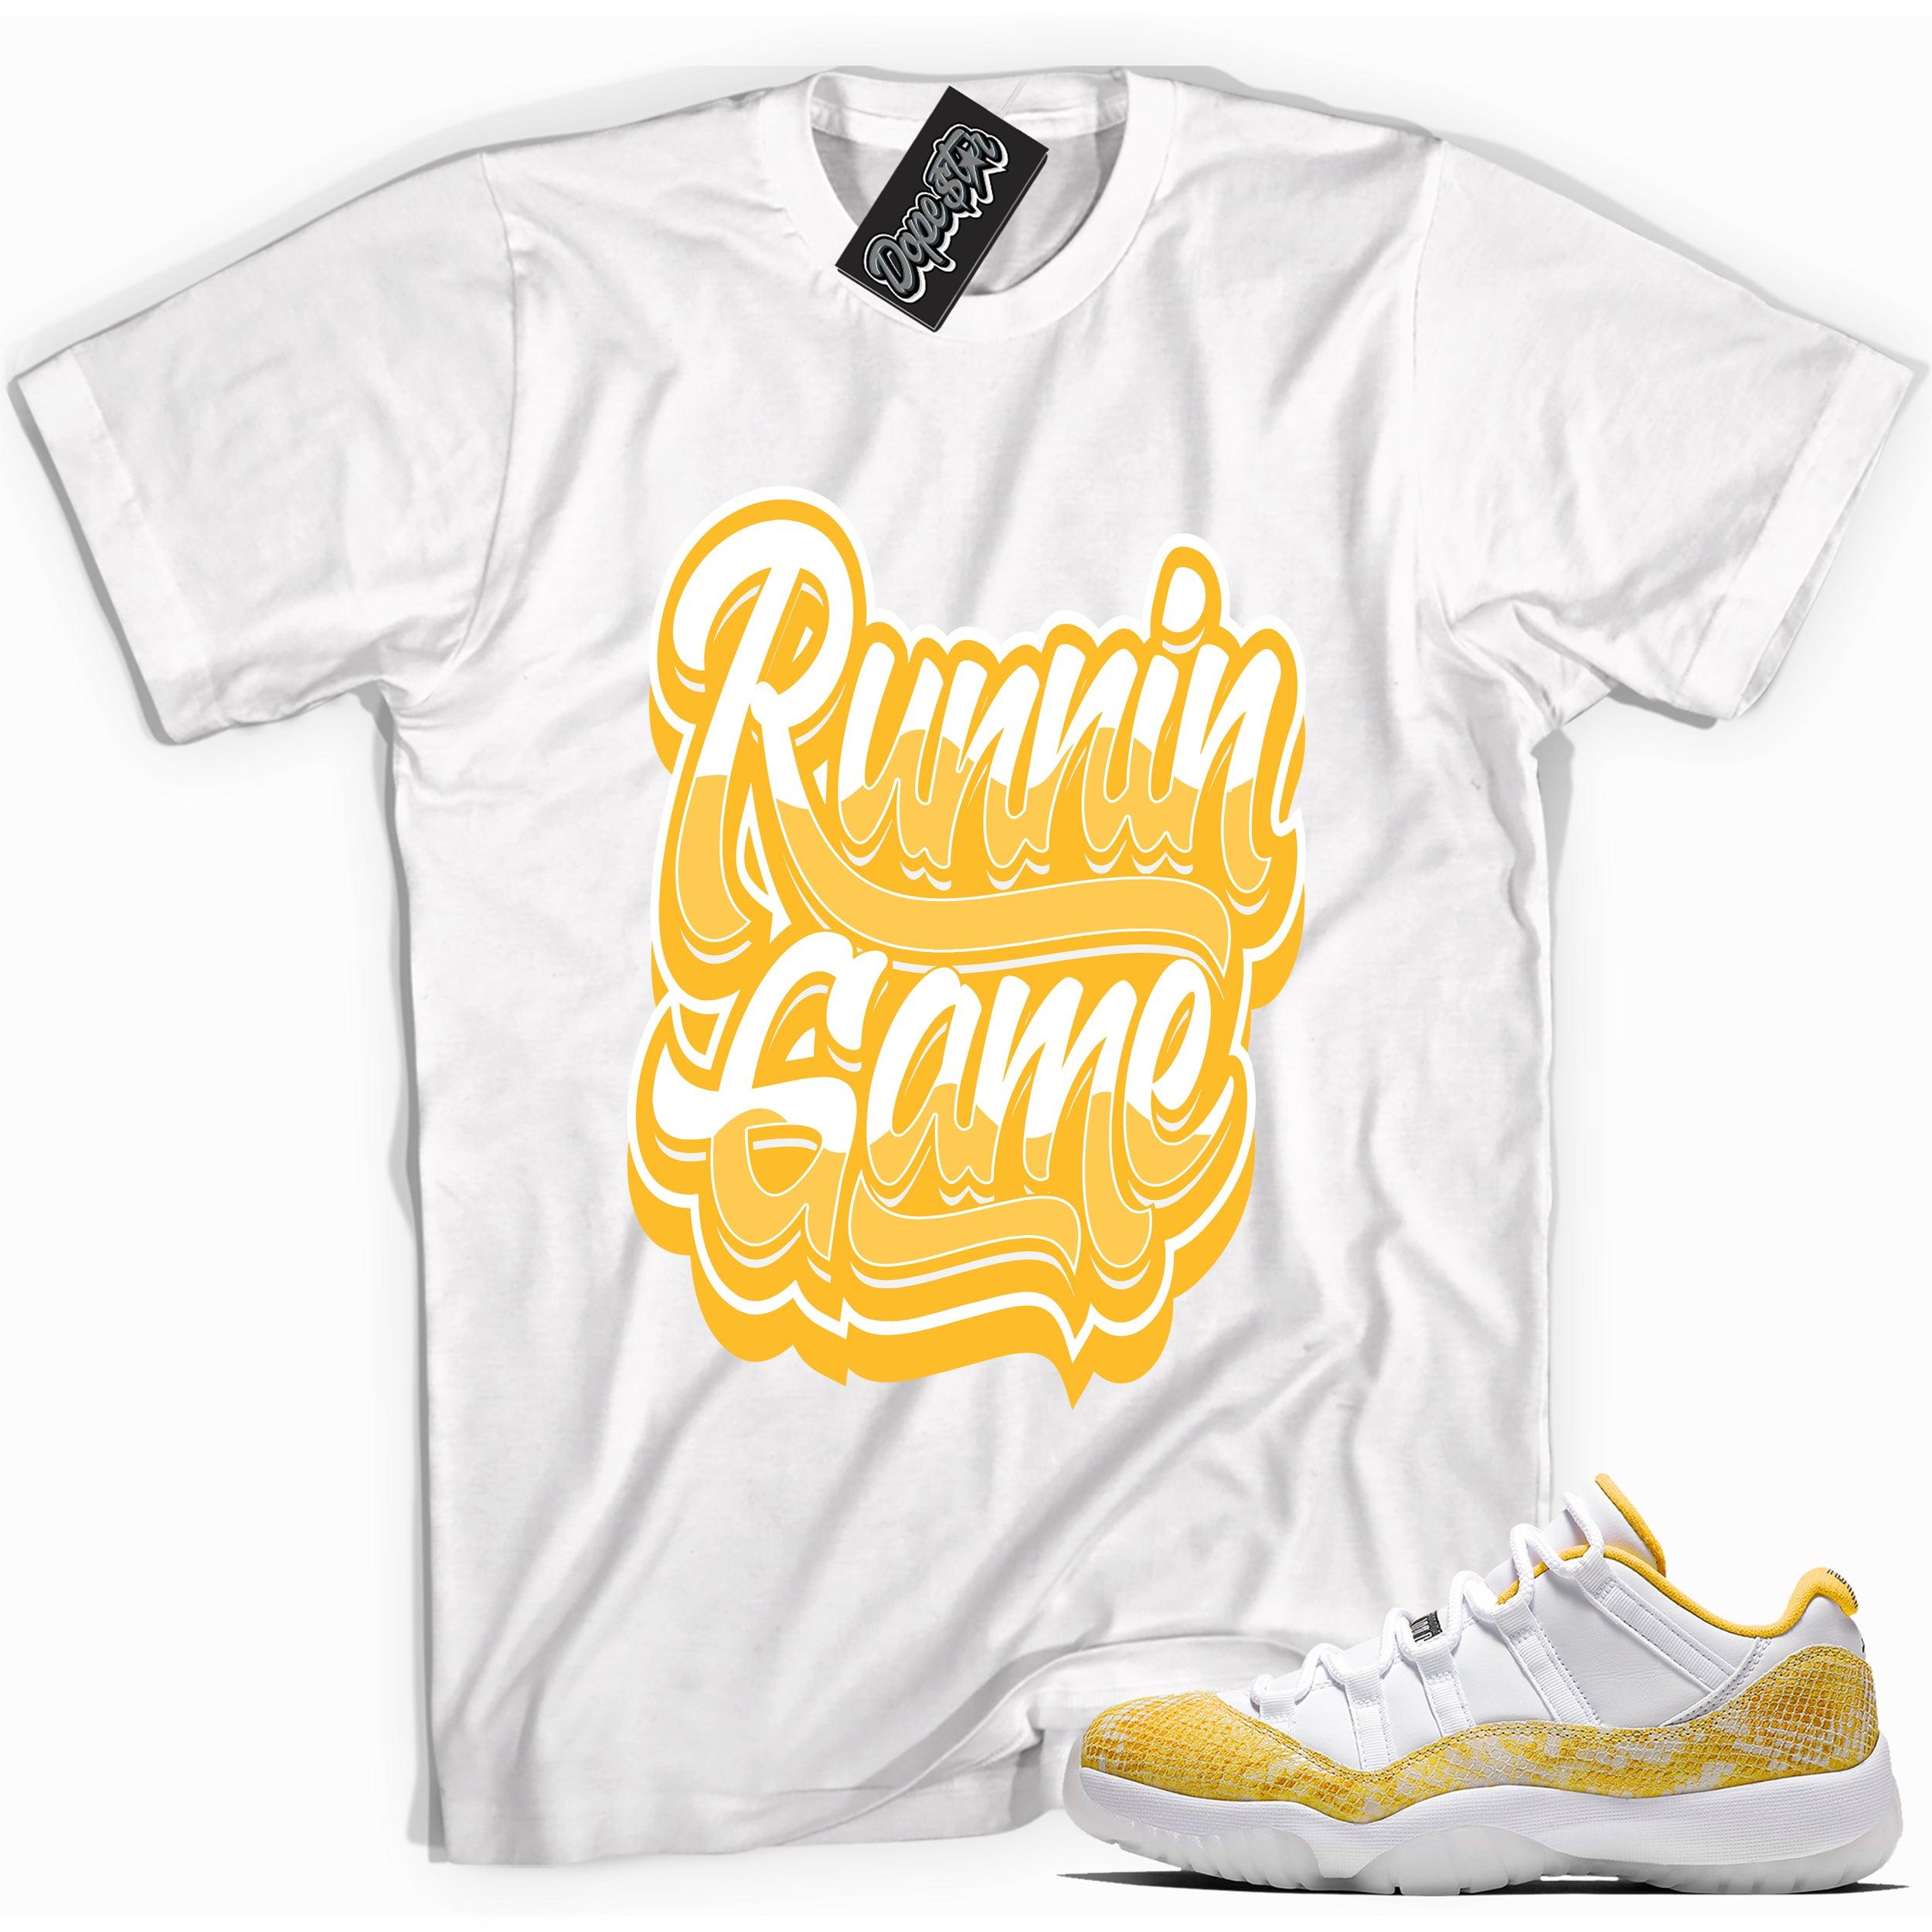 Cool white graphic tee with 'running game' print, that perfectly matches Air Jordan 11 Retro Low Yellow Snakeskin sneakers